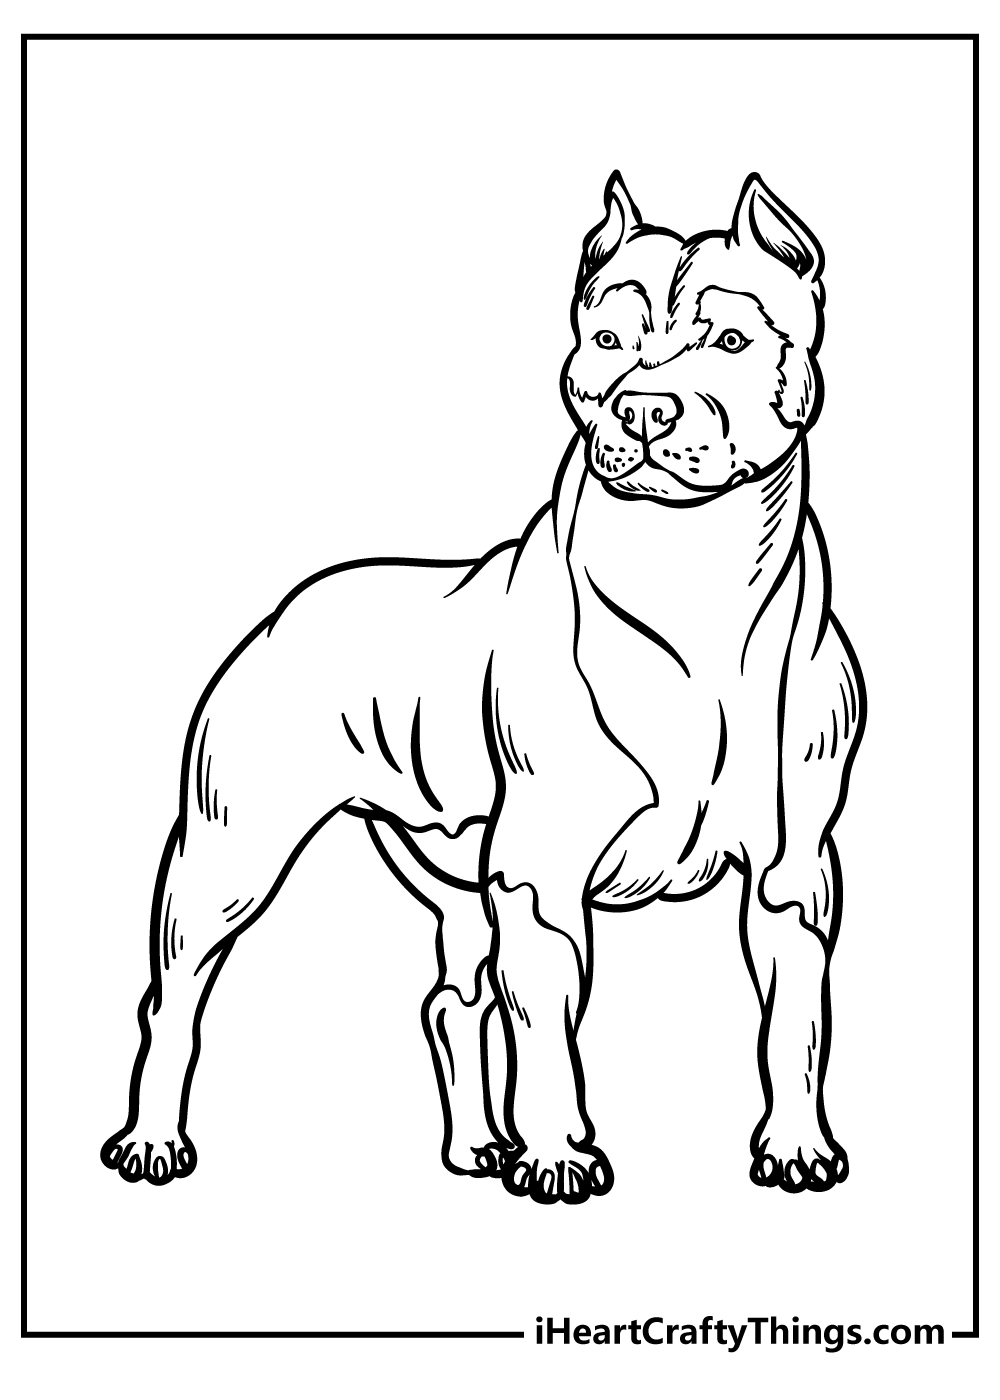 Pitbull Coloring Pages free pdf download